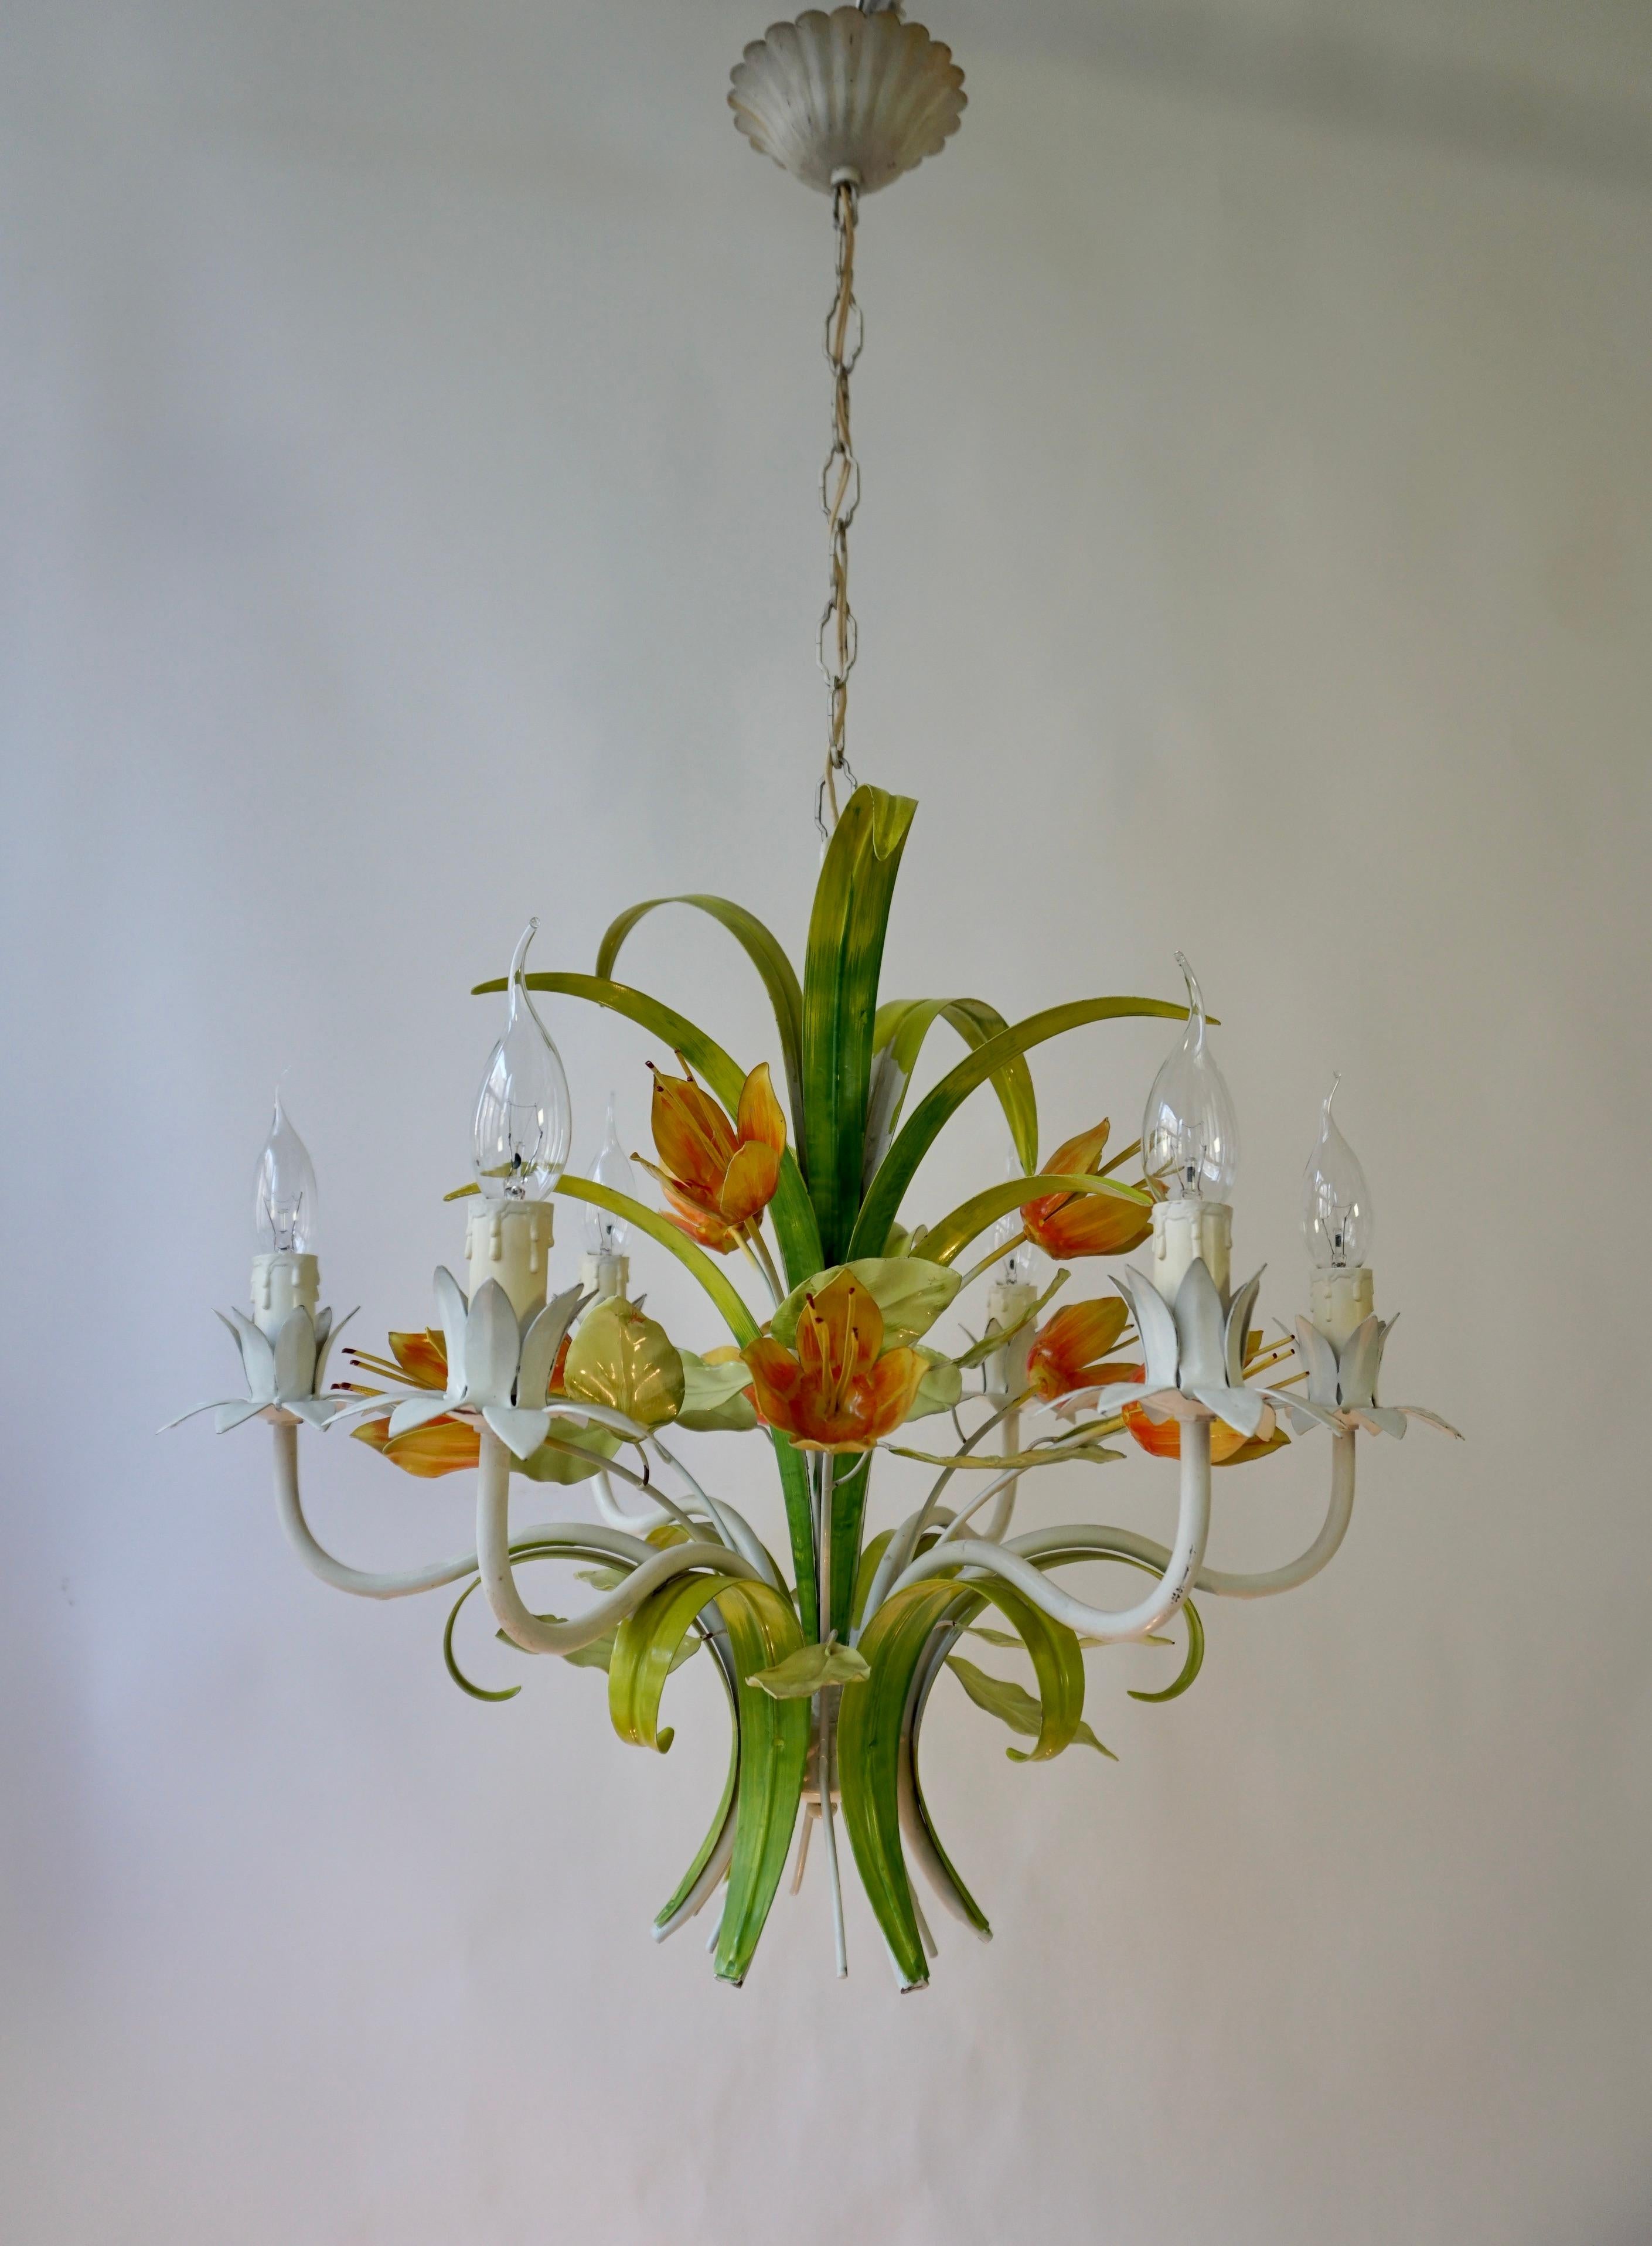 1960s Bright Boho Chic Italian Tole Painted Metal Chandelier With Floral Decor For Sale 3